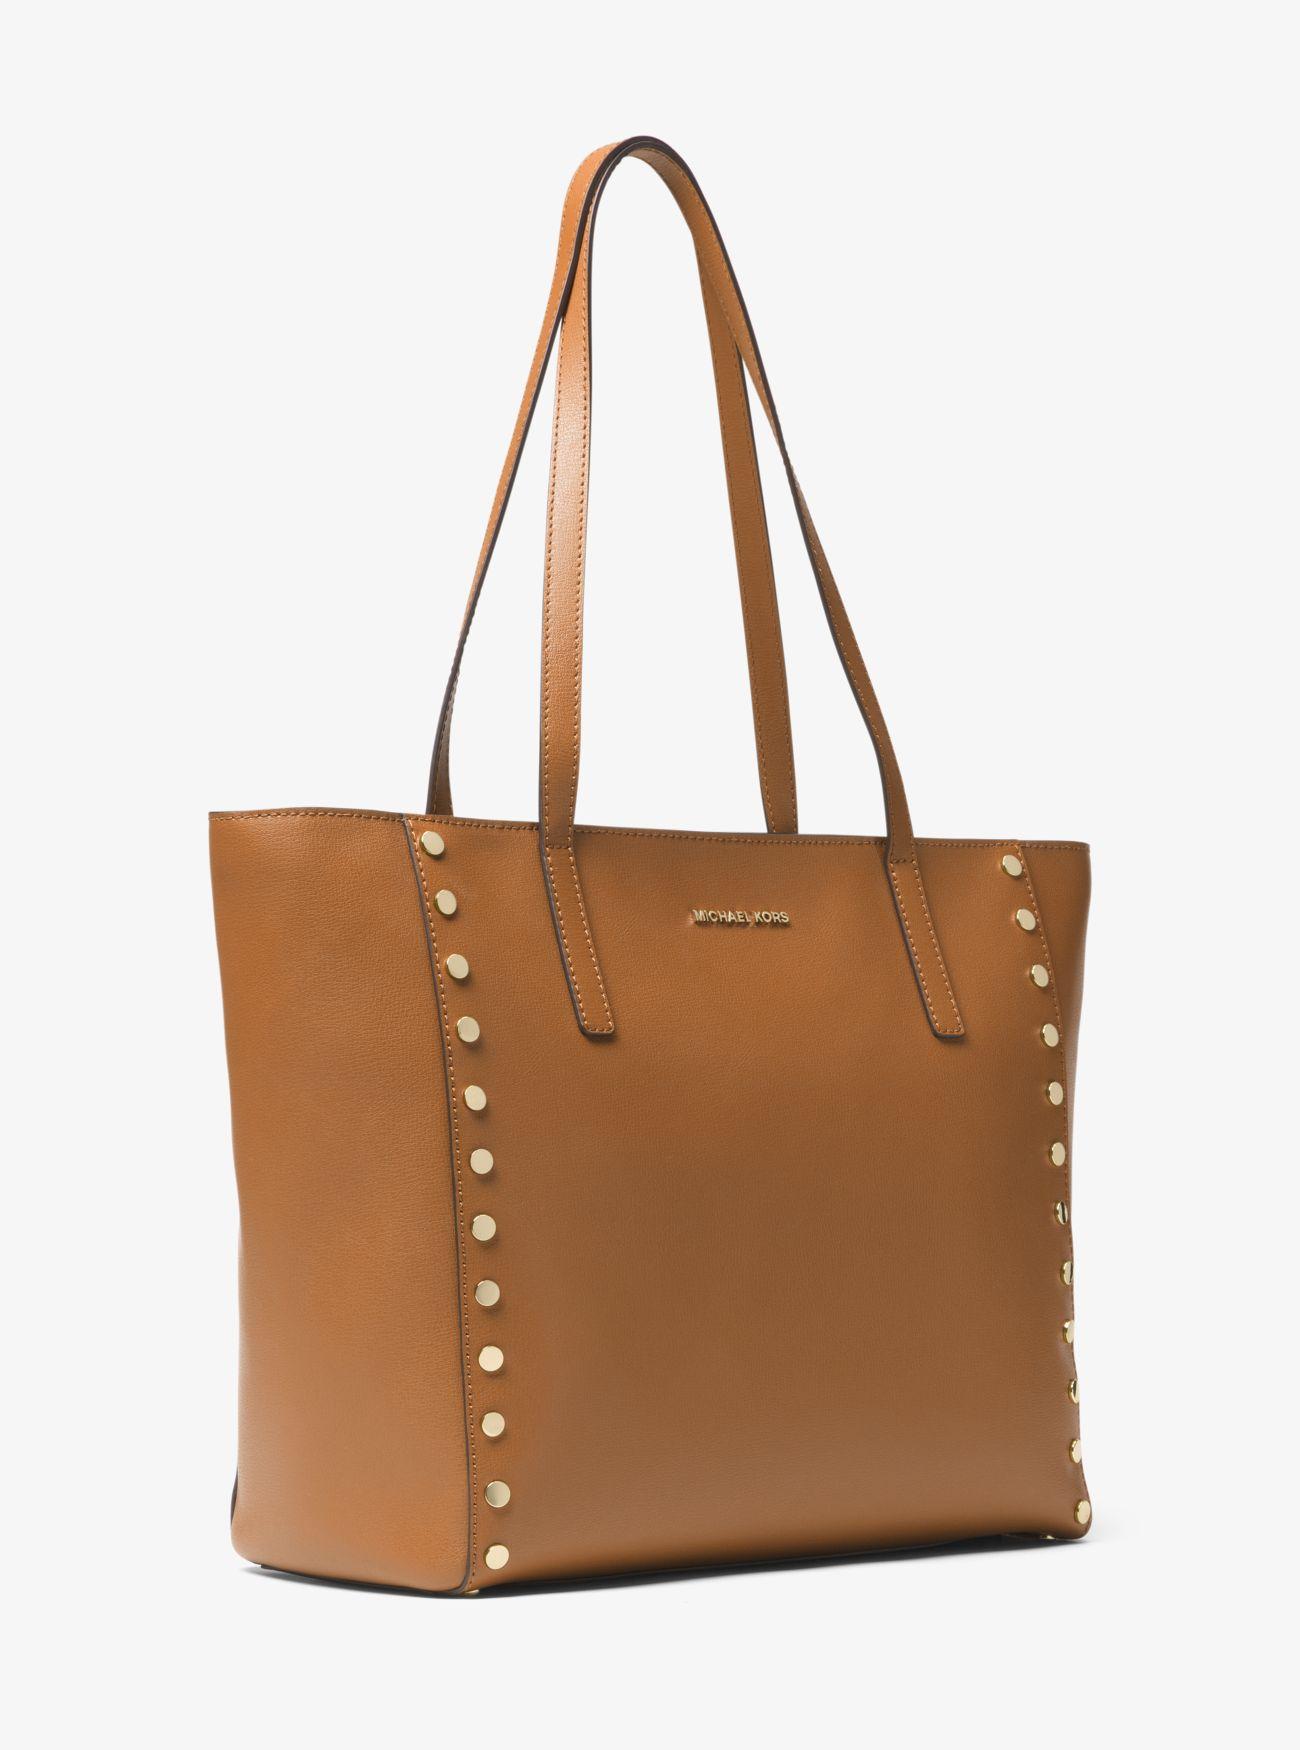 Michael Kors Rivington Large Studded Leather Tote Bag in Brown - Lyst